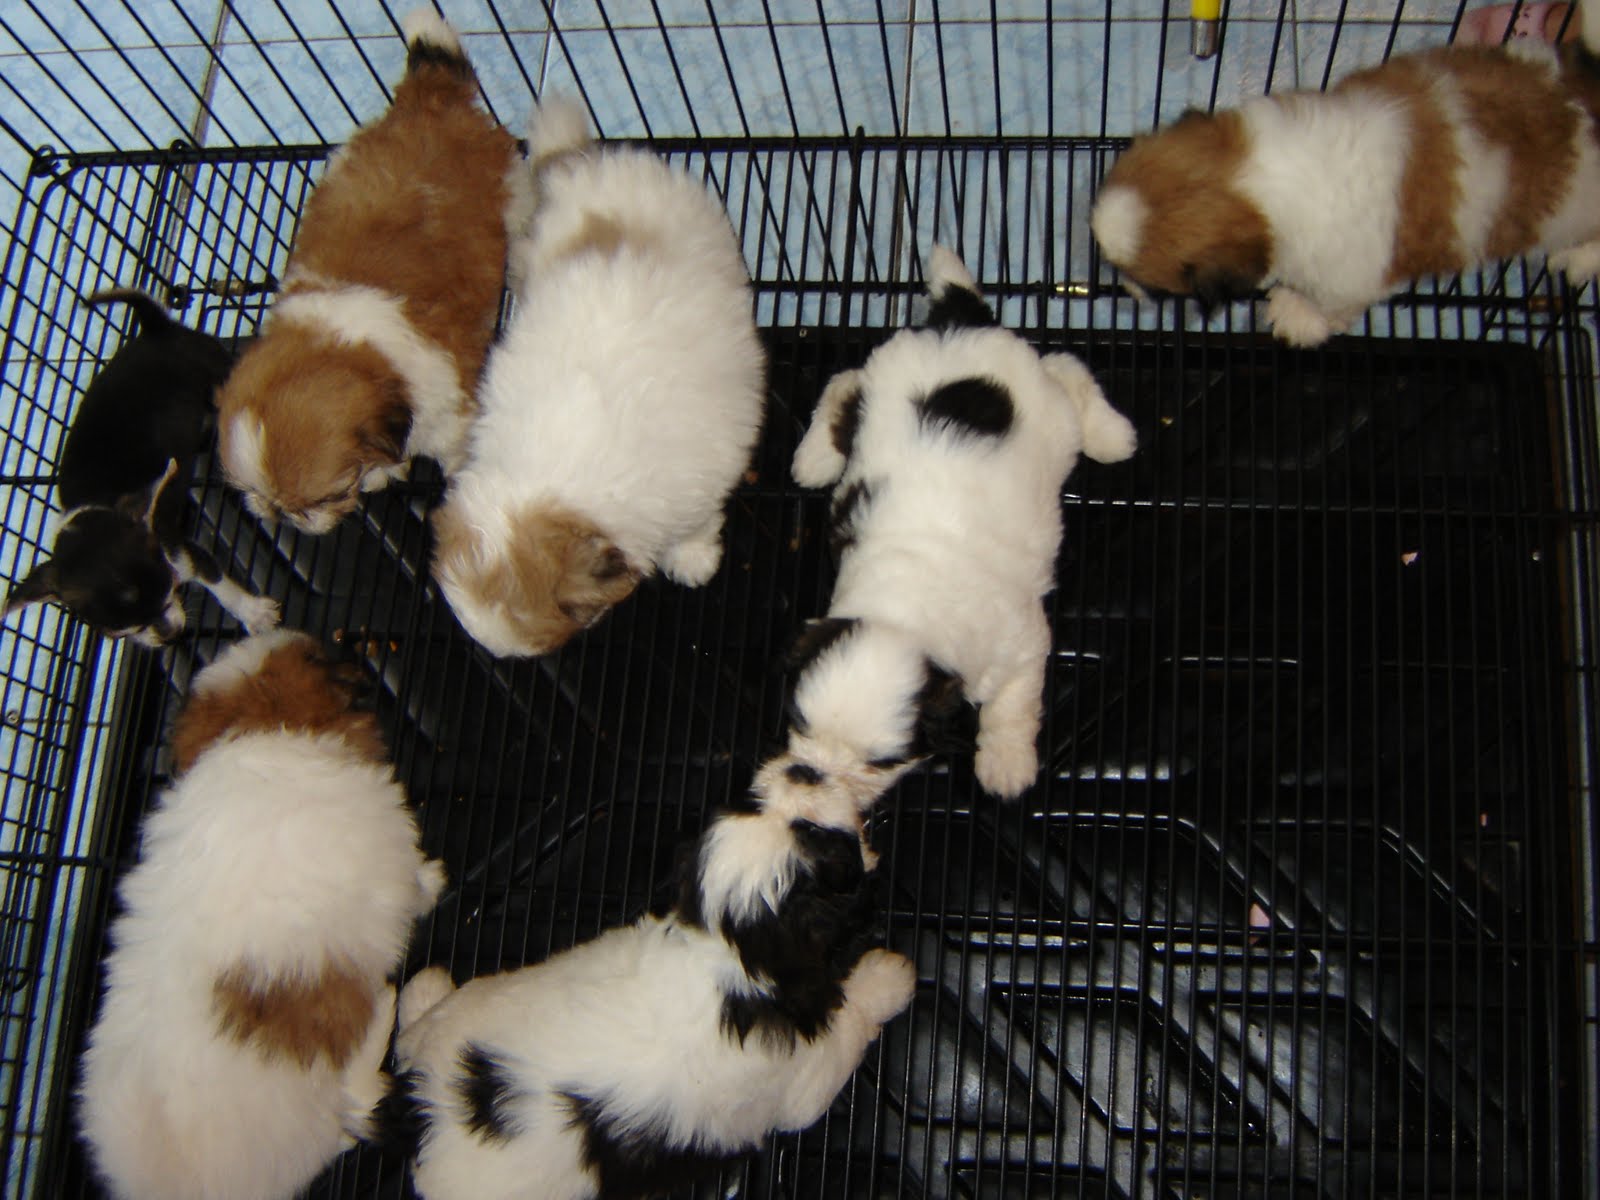 Shih+tzu+poodle+mix+puppies+for+sale+in+michigan